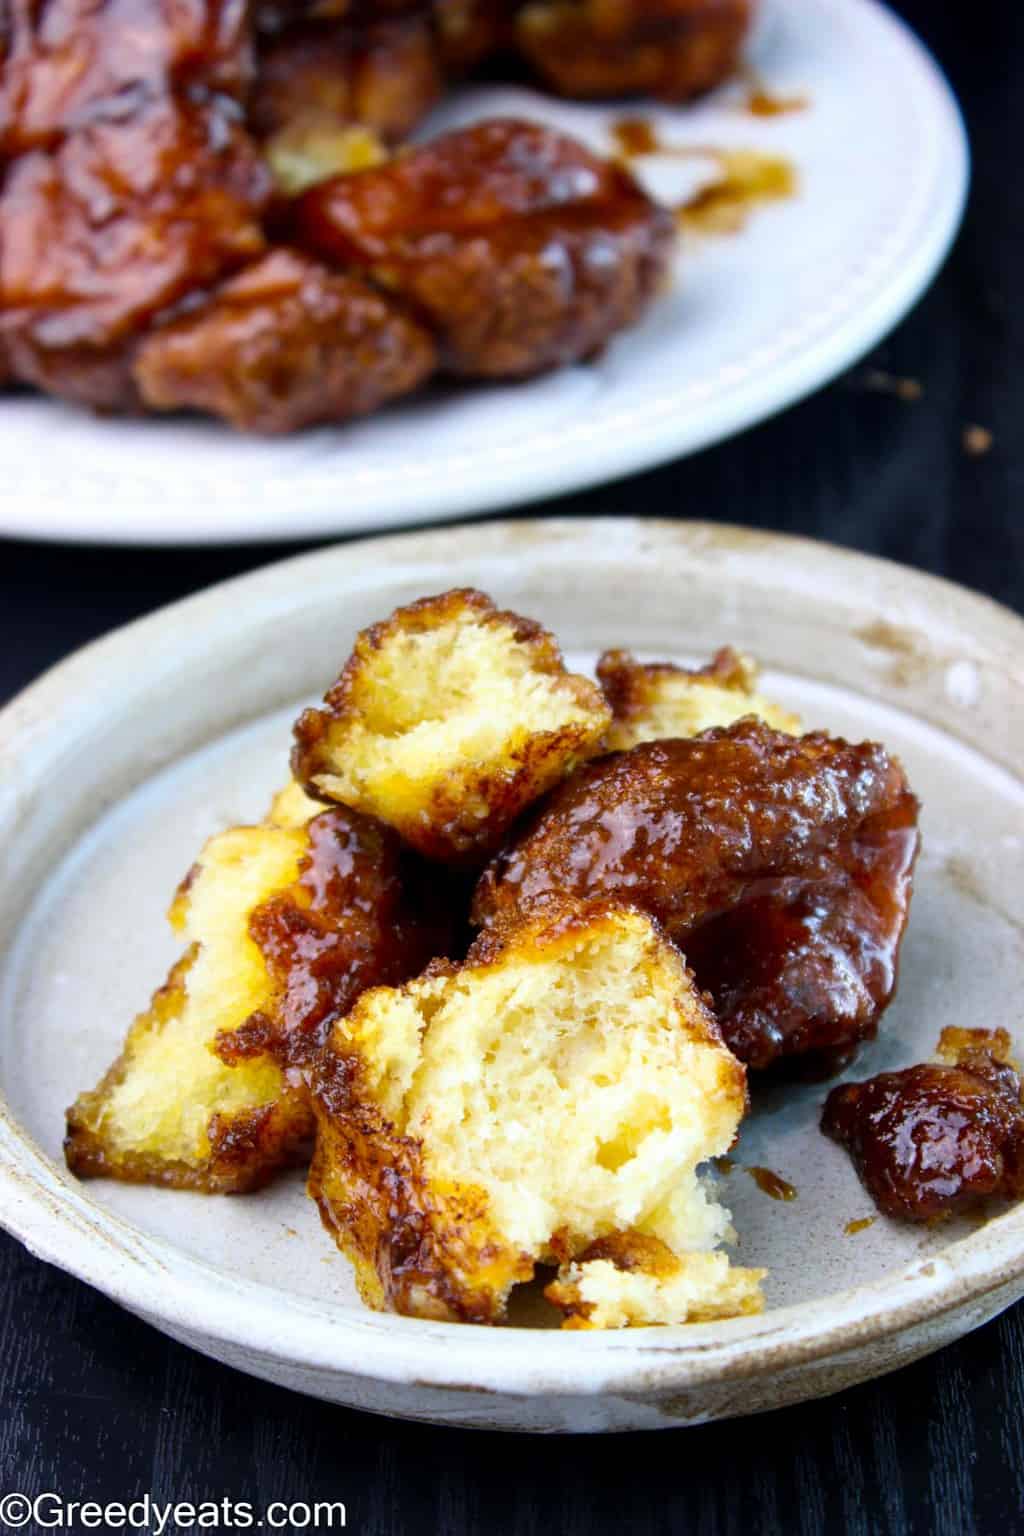 The BEST MONKEY BREAD that you will ever taste served on a ceramic plate.